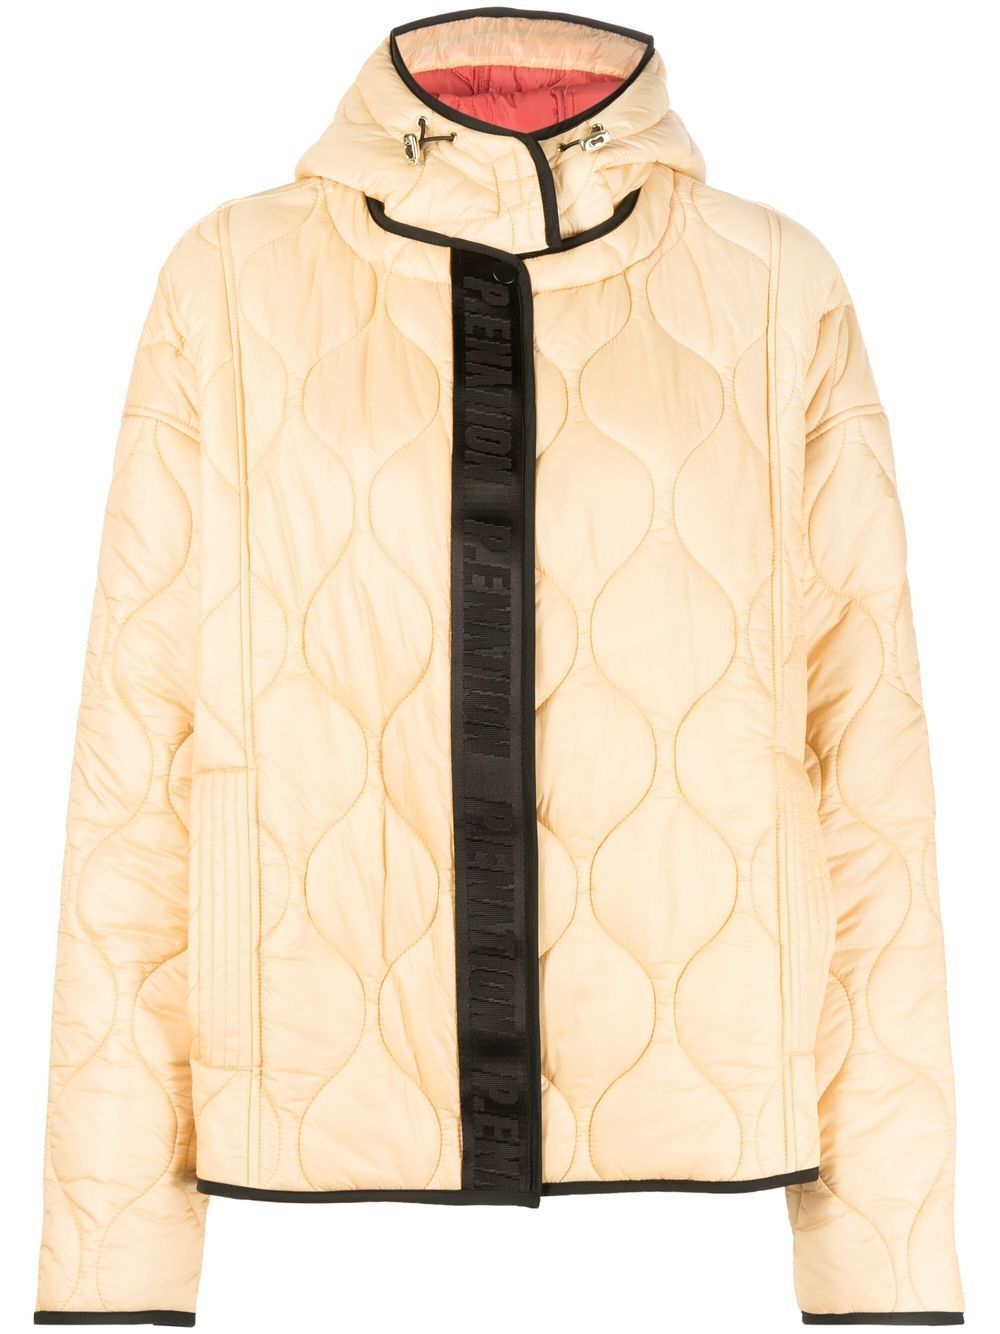 P.E Nation Advocate quilted jacket - Orange